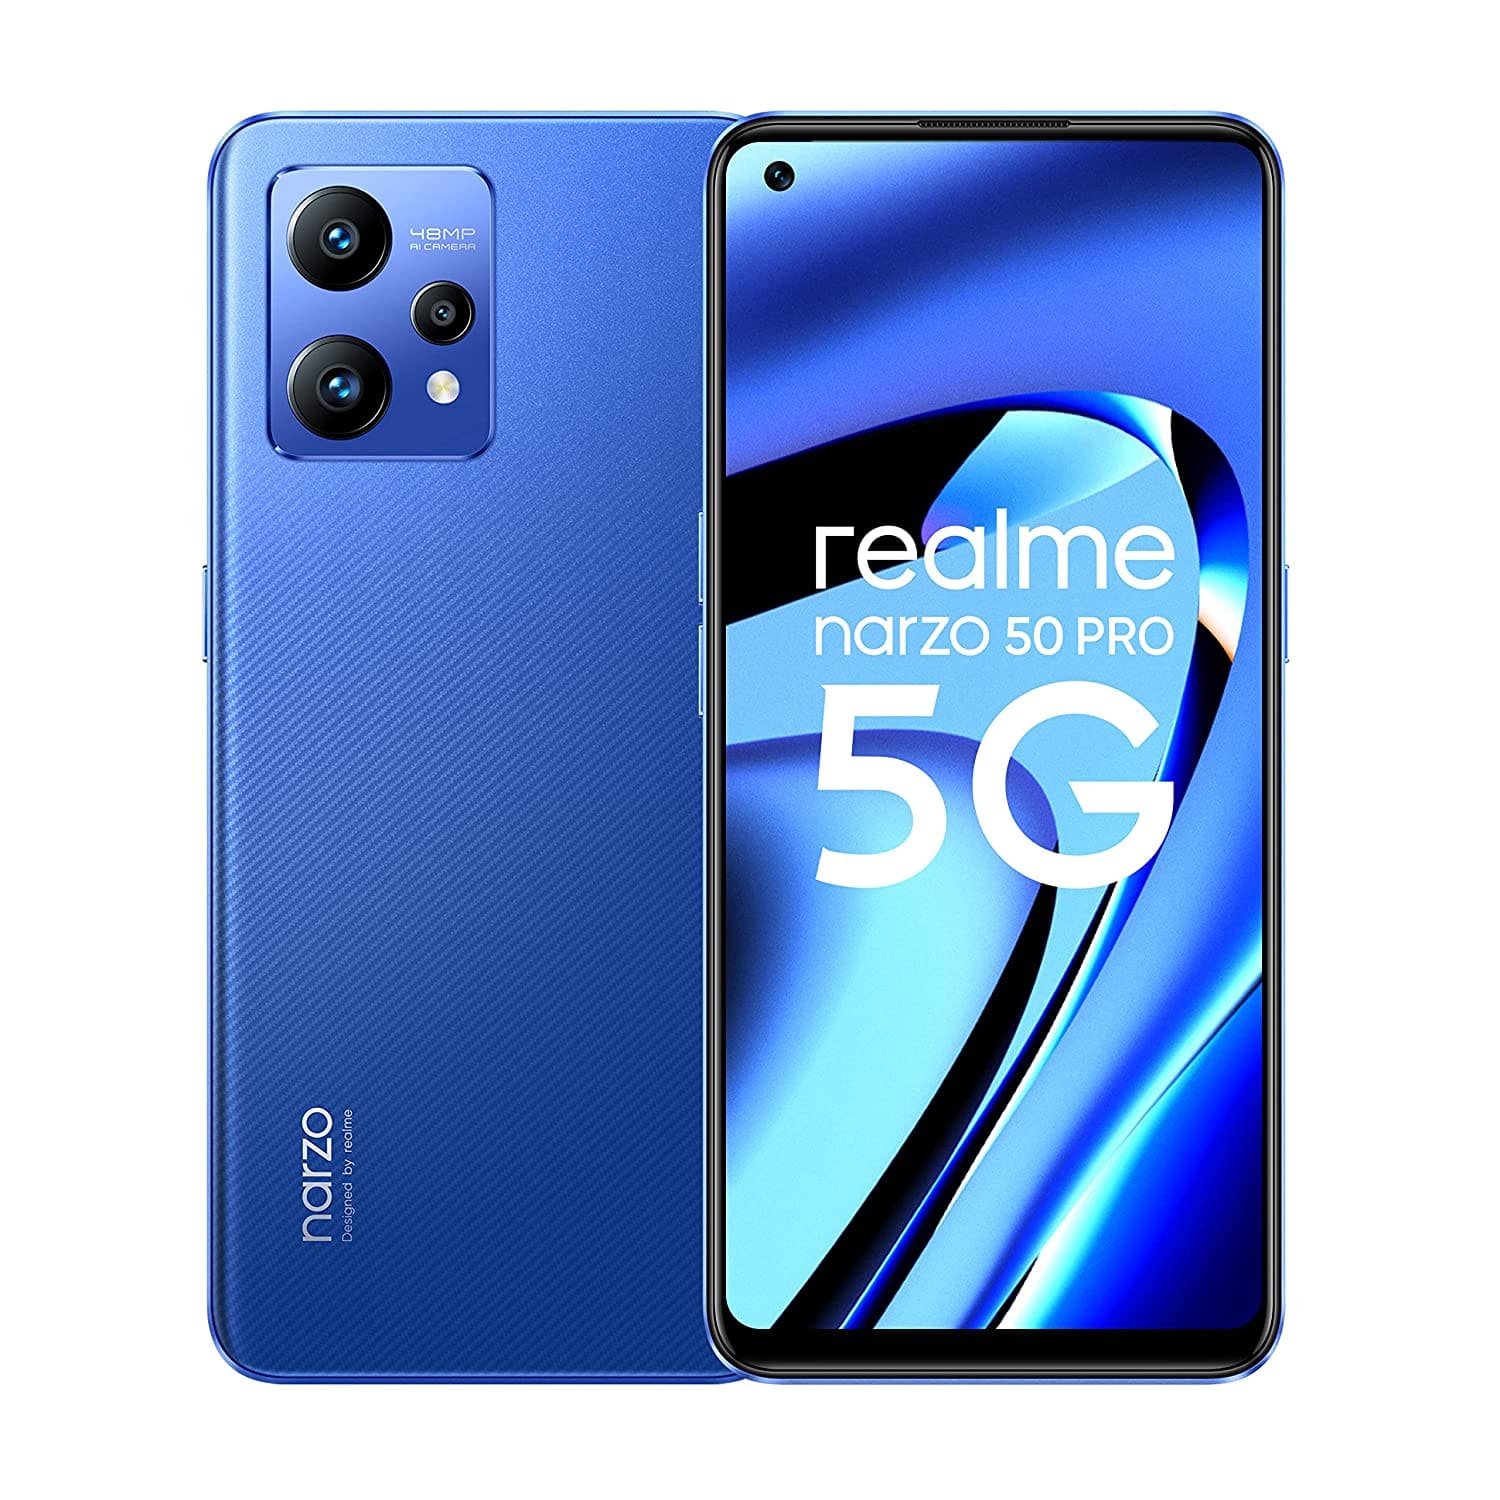 Realme Narzo 50 Pro - Best Gaming Mobile phone under 30000